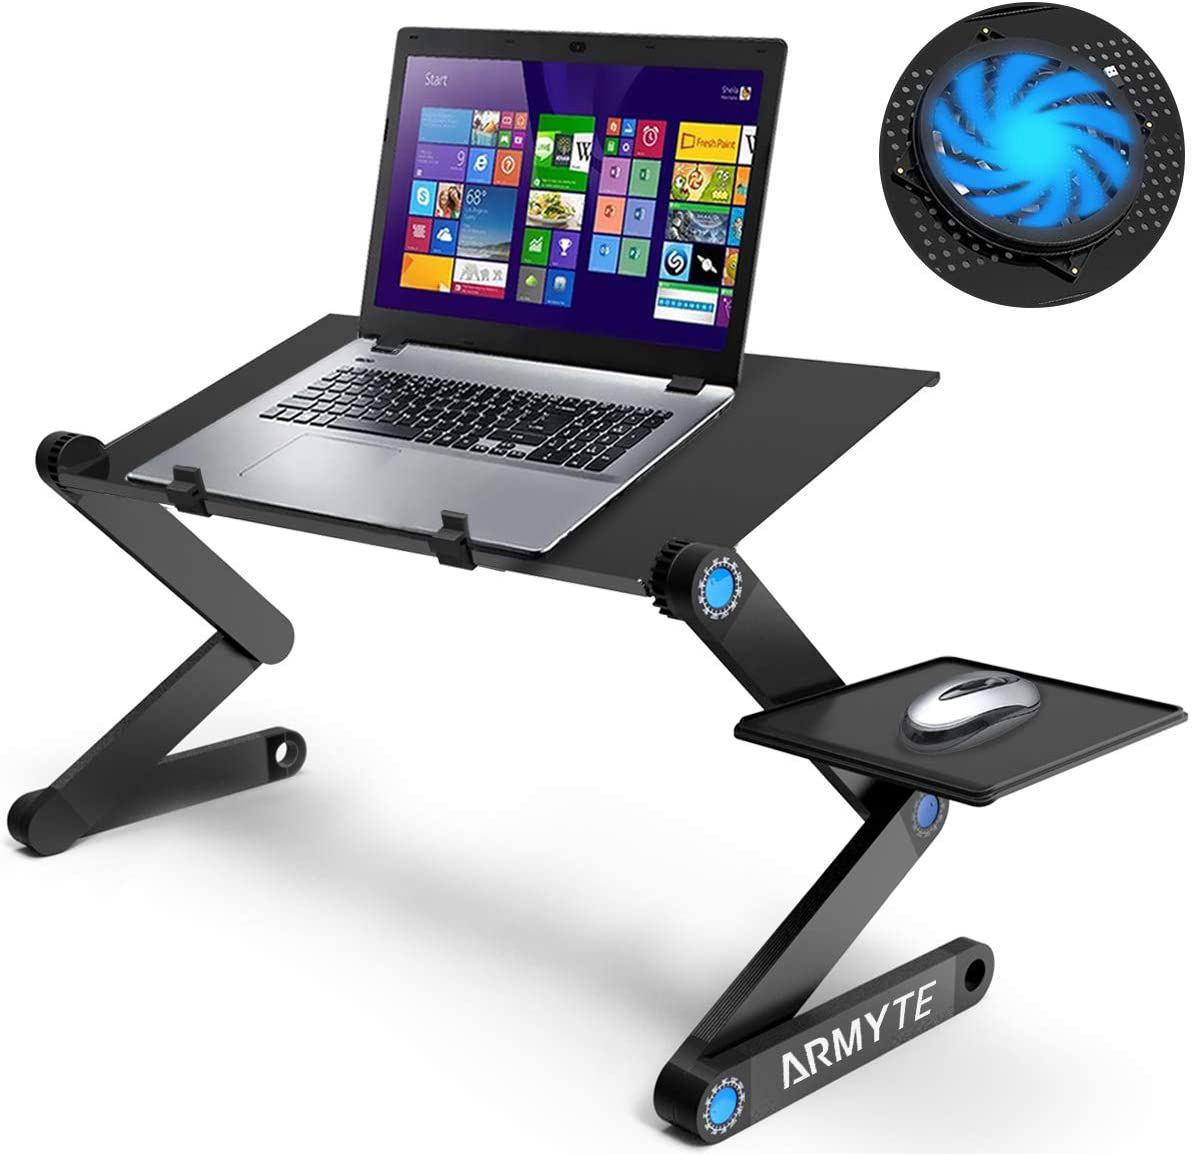 Extra Wide Adjustable Laptop Stand With Cooling Fan & Mouse Pad For 17 Intended For Black Adjustable Laptop Desks (View 1 of 15)